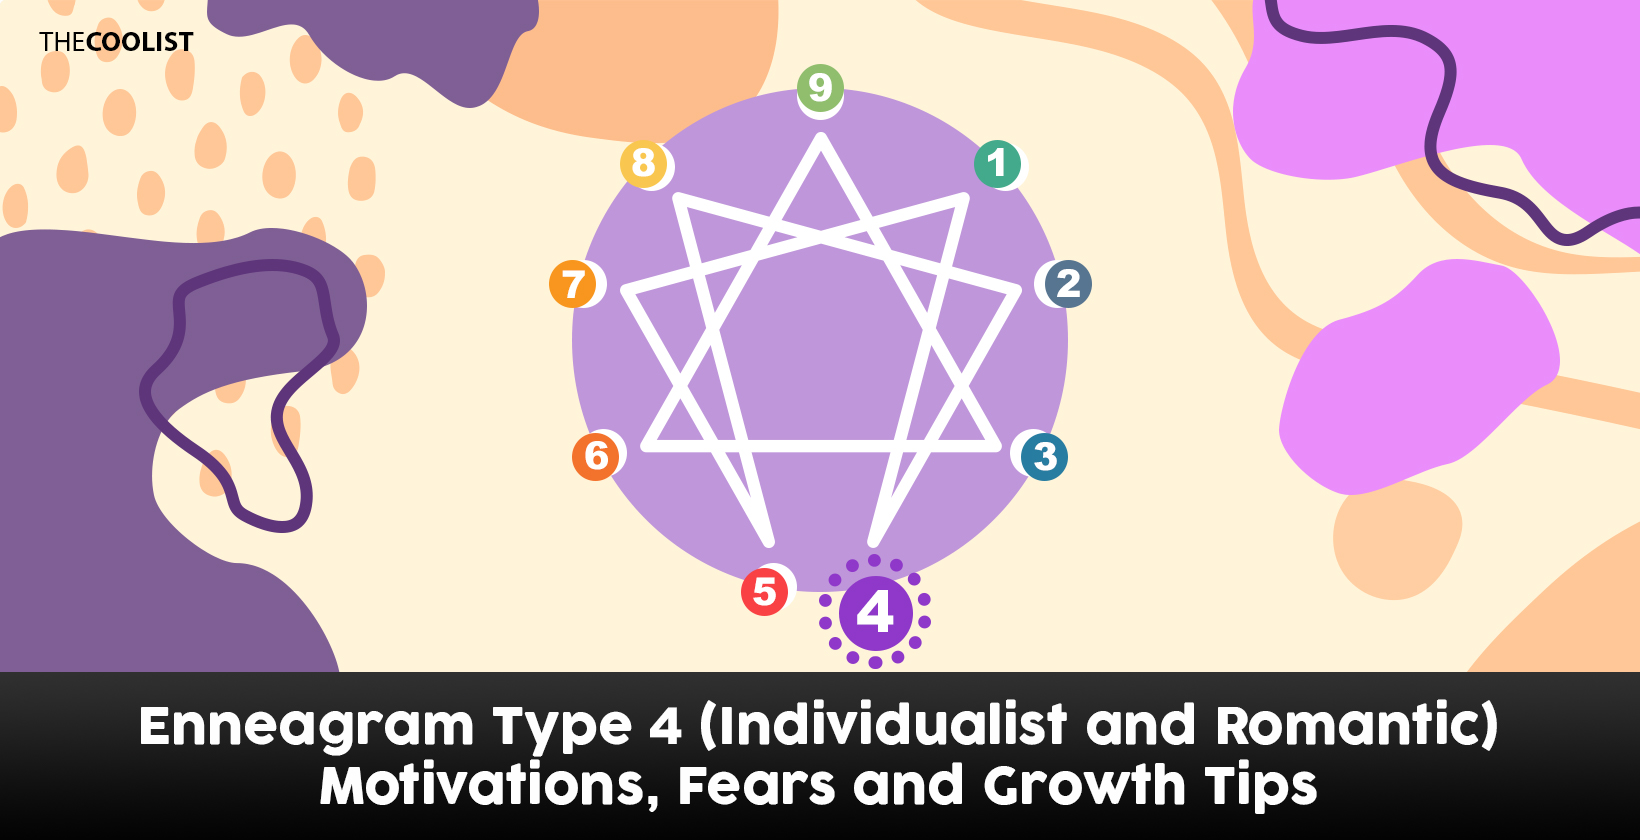 Enneagram Type 4: The Individualist and The Romantic